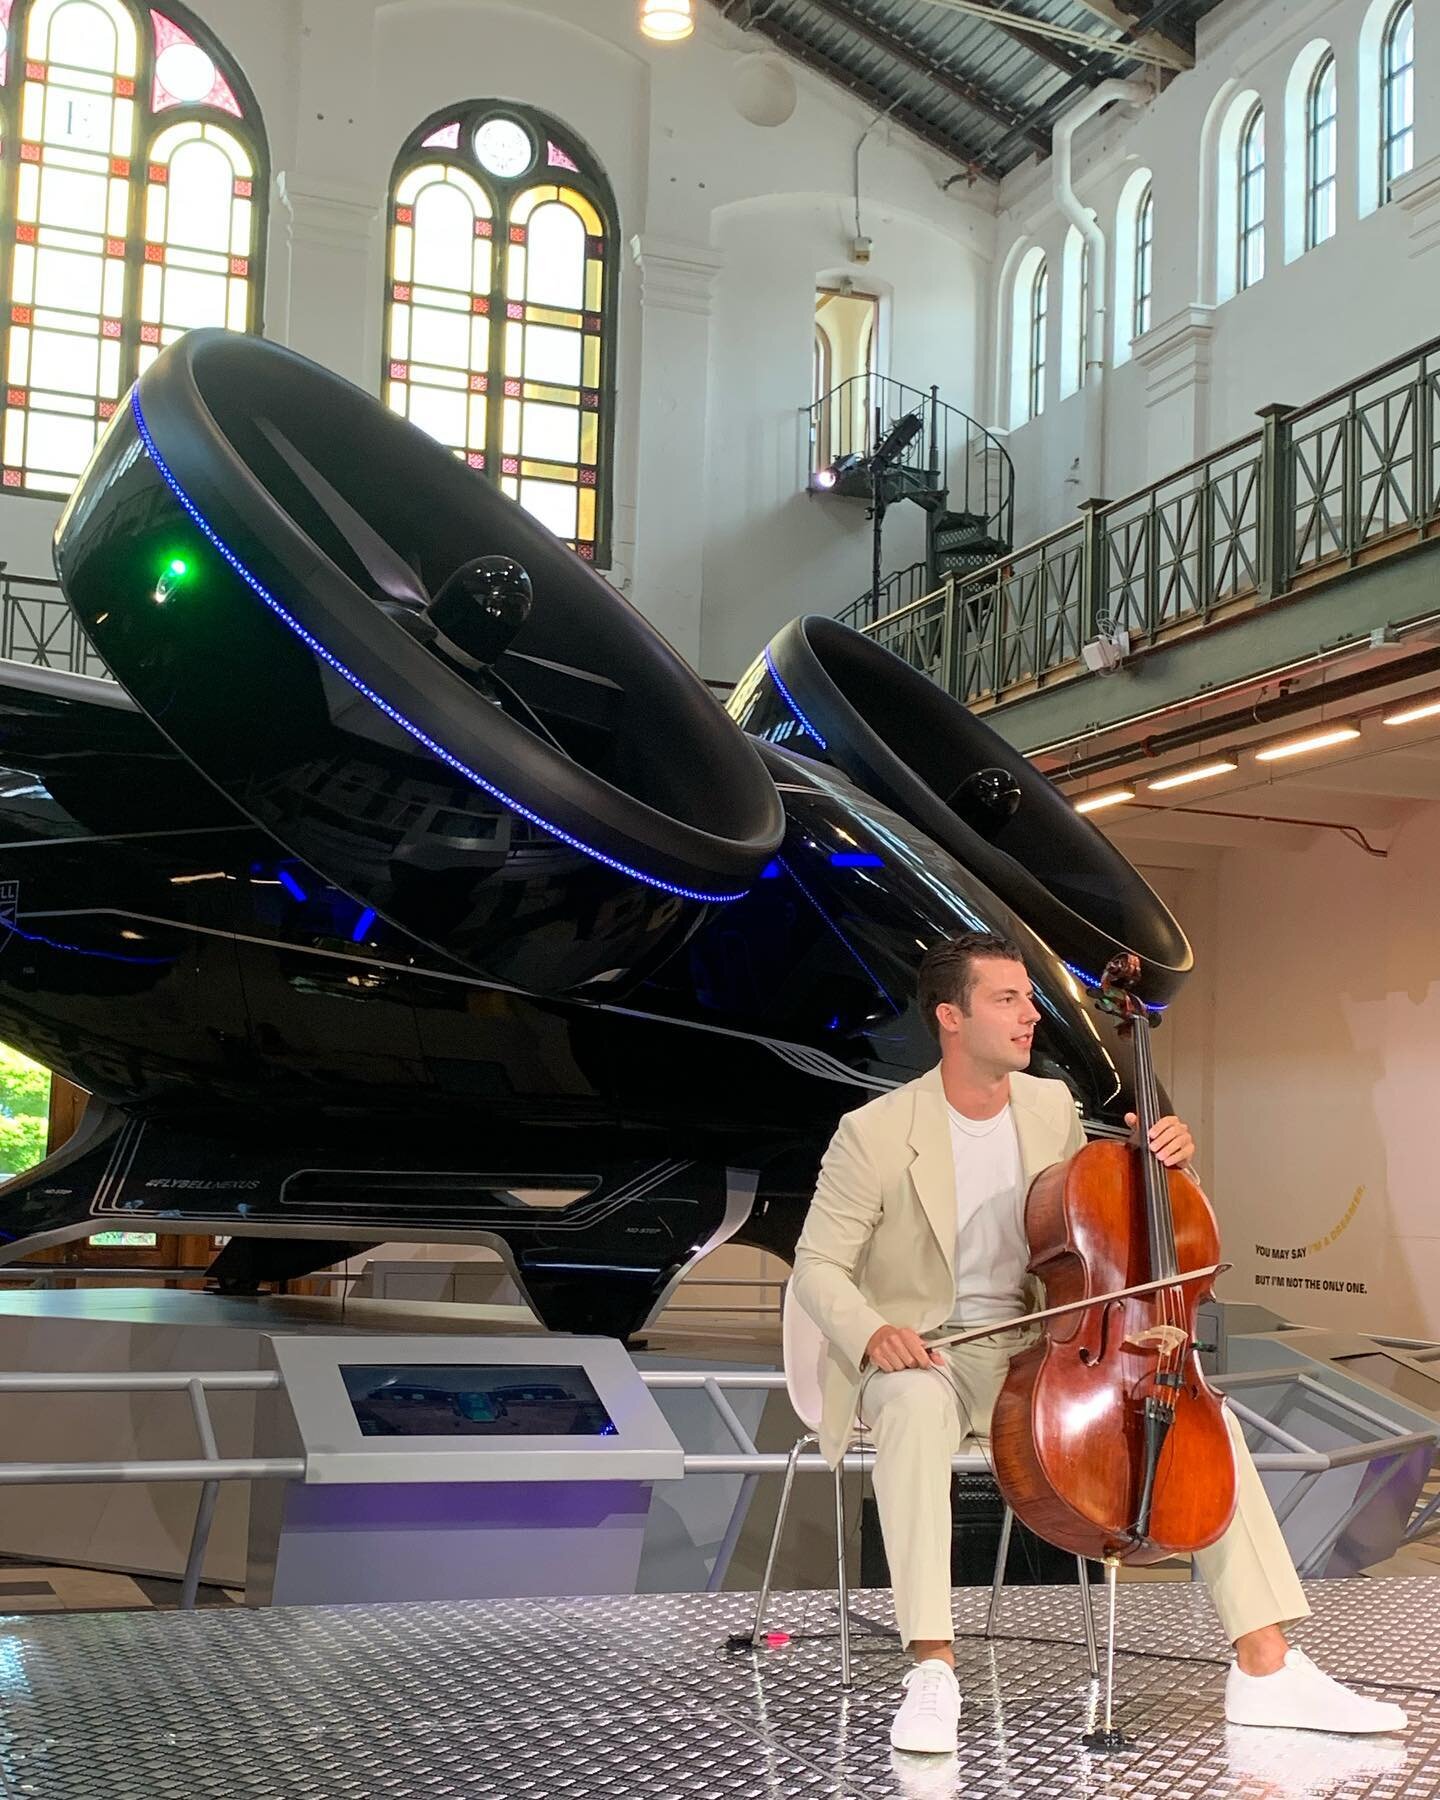 Thank you to the @smithsonianaib for inviting me to play for the closing of the FUTURES exhibit! I met so many amazing people who made this collaborative celebration happen! Swipe left for a quick clip of my performance 🎻🥂Final party is tonight! 

